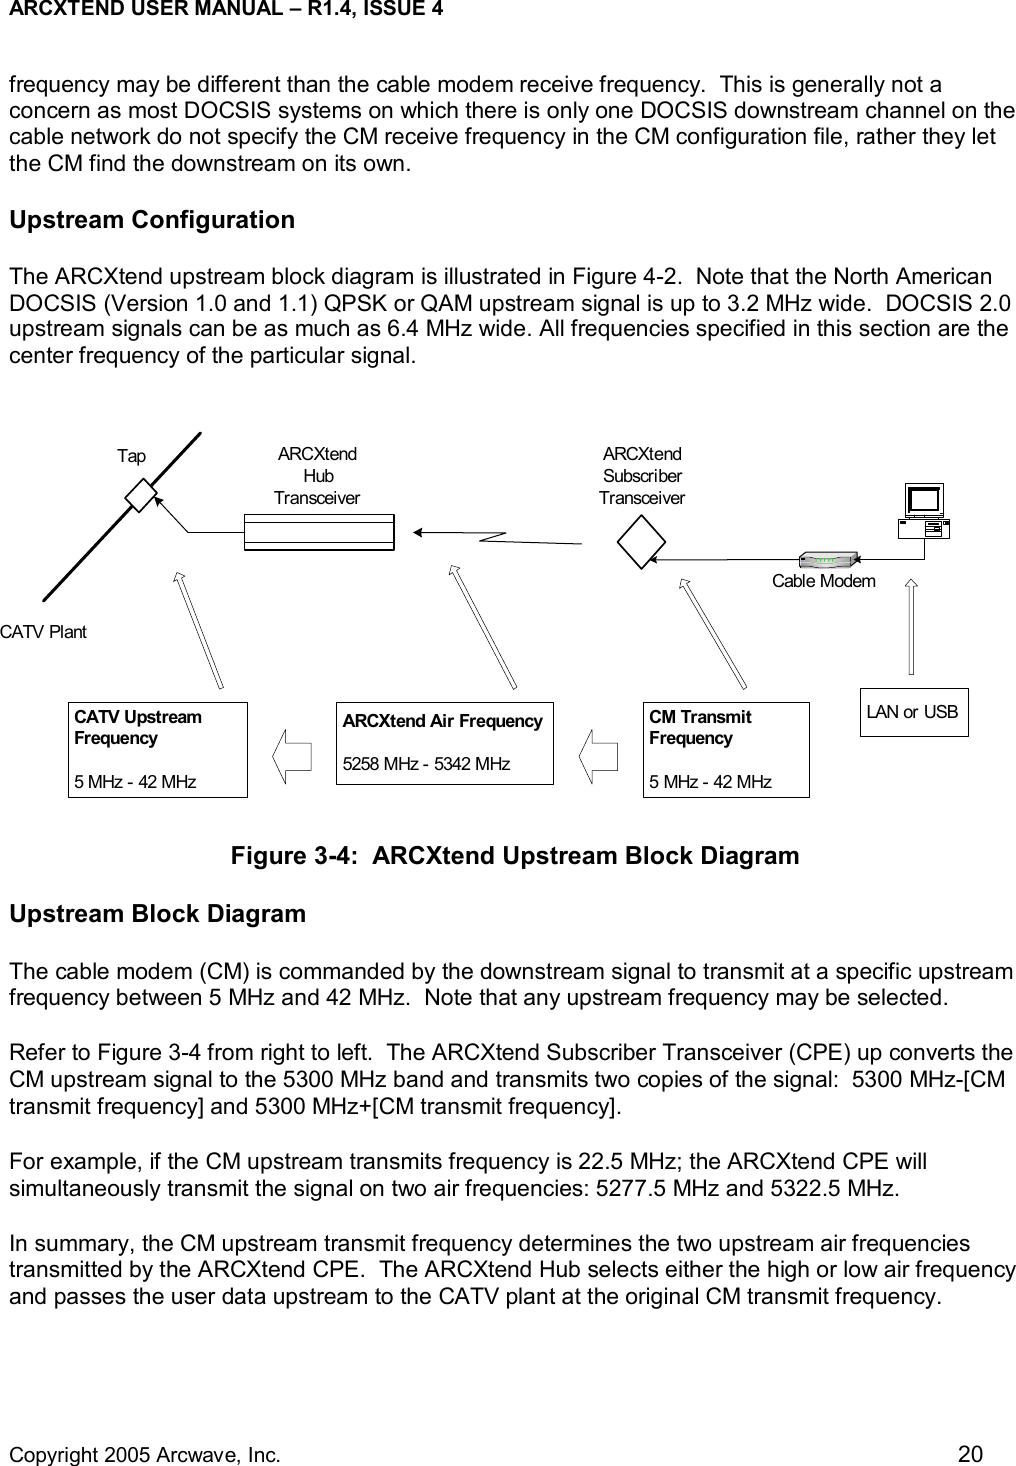 ARCXTEND USER MANUAL – R1.4, ISSUE 4  Copyright 2005 Arcwave, Inc.    20 TapCATV PlantARCXtendSubscriberTransceiverCable ModemARCXtendHubTransceiverCATV UpstreamFrequency5 MHz - 42 MHzARCXtend Air Frequency5258 MHz - 5342 MHzCM TransmitFrequency5 MHz - 42 MHzLAN or USBfrequency may be different than the cable modem receive frequency.  This is generally not a concern as most DOCSIS systems on which there is only one DOCSIS downstream channel on the cable network do not specify the CM receive frequency in the CM configuration file, rather they let the CM find the downstream on its own.   Upstream Configuration The ARCXtend upstream block diagram is illustrated in Figure 4-2.  Note that the North American DOCSIS (Version 1.0 and 1.1) QPSK or QAM upstream signal is up to 3.2 MHz wide.  DOCSIS 2.0 upstream signals can be as much as 6.4 MHz wide. All frequencies specified in this section are the center frequency of the particular signal.         Figure 3-4:  ARCXtend Upstream Block Diagram Upstream Block Diagram The cable modem (CM) is commanded by the downstream signal to transmit at a specific upstream frequency between 5 MHz and 42 MHz.  Note that any upstream frequency may be selected. Refer to Figure 3-4 from right to left.  The ARCXtend Subscriber Transceiver (CPE) up converts the CM upstream signal to the 5300 MHz band and transmits two copies of the signal:  5300 MHz-[CM transmit frequency] and 5300 MHz+[CM transmit frequency].   For example, if the CM upstream transmits frequency is 22.5 MHz; the ARCXtend CPE will simultaneously transmit the signal on two air frequencies: 5277.5 MHz and 5322.5 MHz. In summary, the CM upstream transmit frequency determines the two upstream air frequencies transmitted by the ARCXtend CPE.  The ARCXtend Hub selects either the high or low air frequency and passes the user data upstream to the CATV plant at the original CM transmit frequency. 